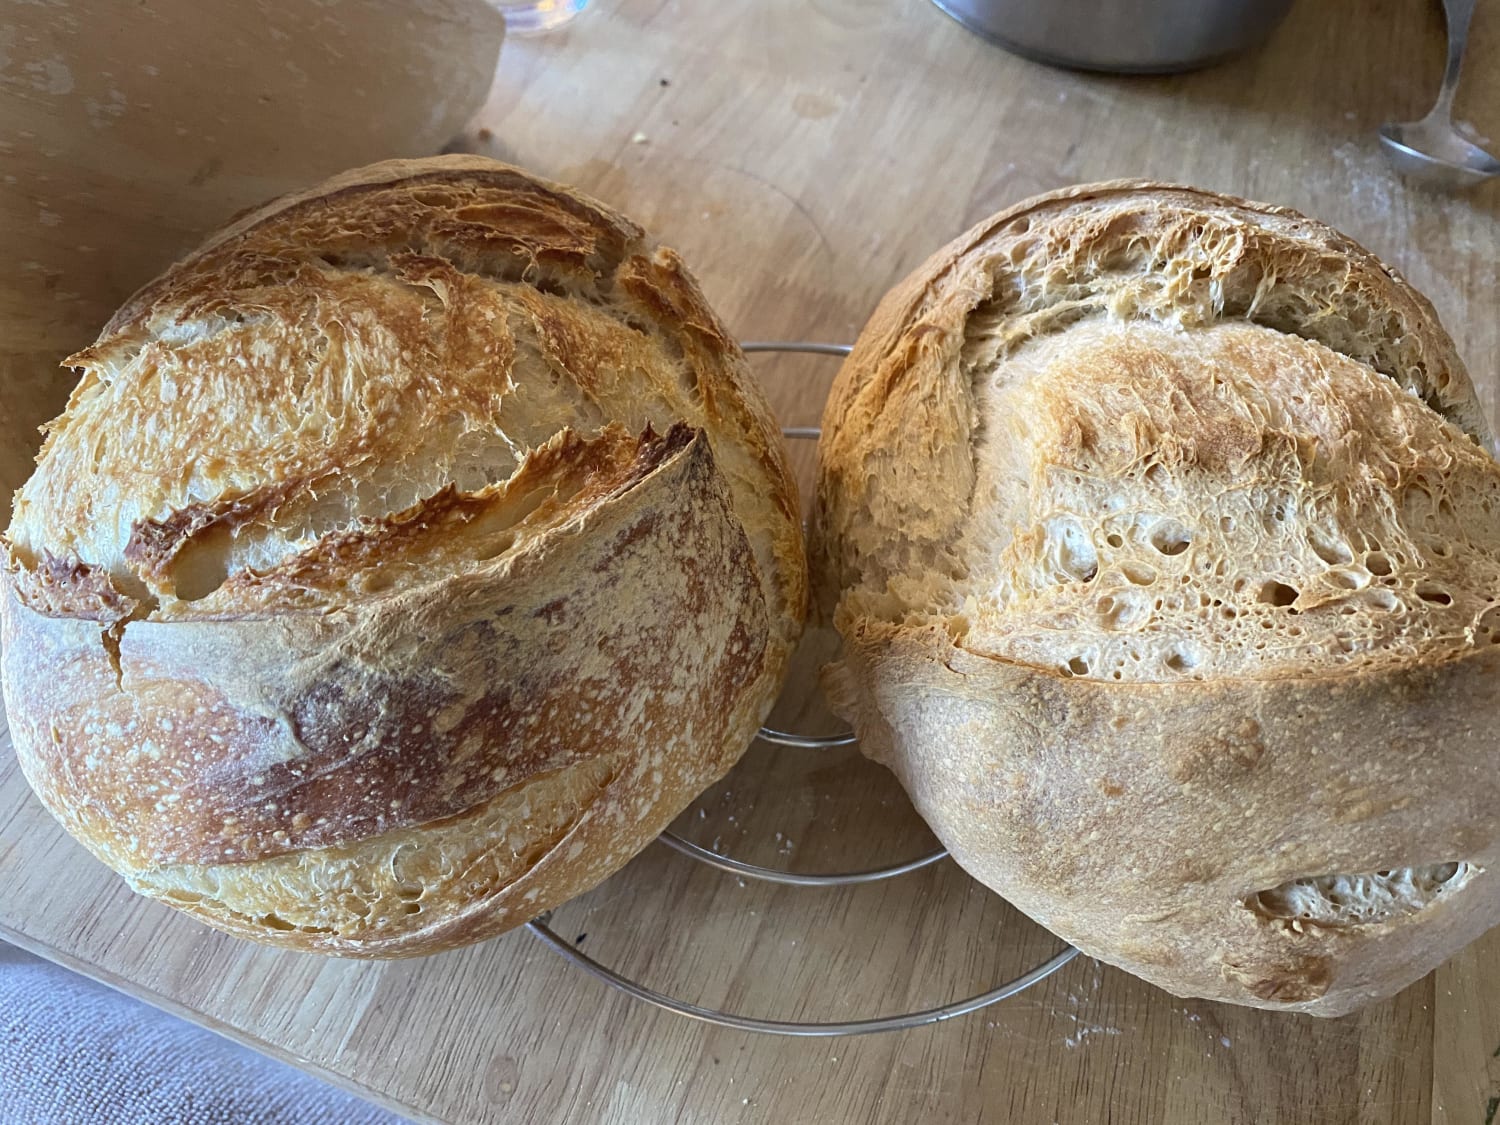 Left was in the Dutch oven, right was on a baking sheet. Makes a difference!